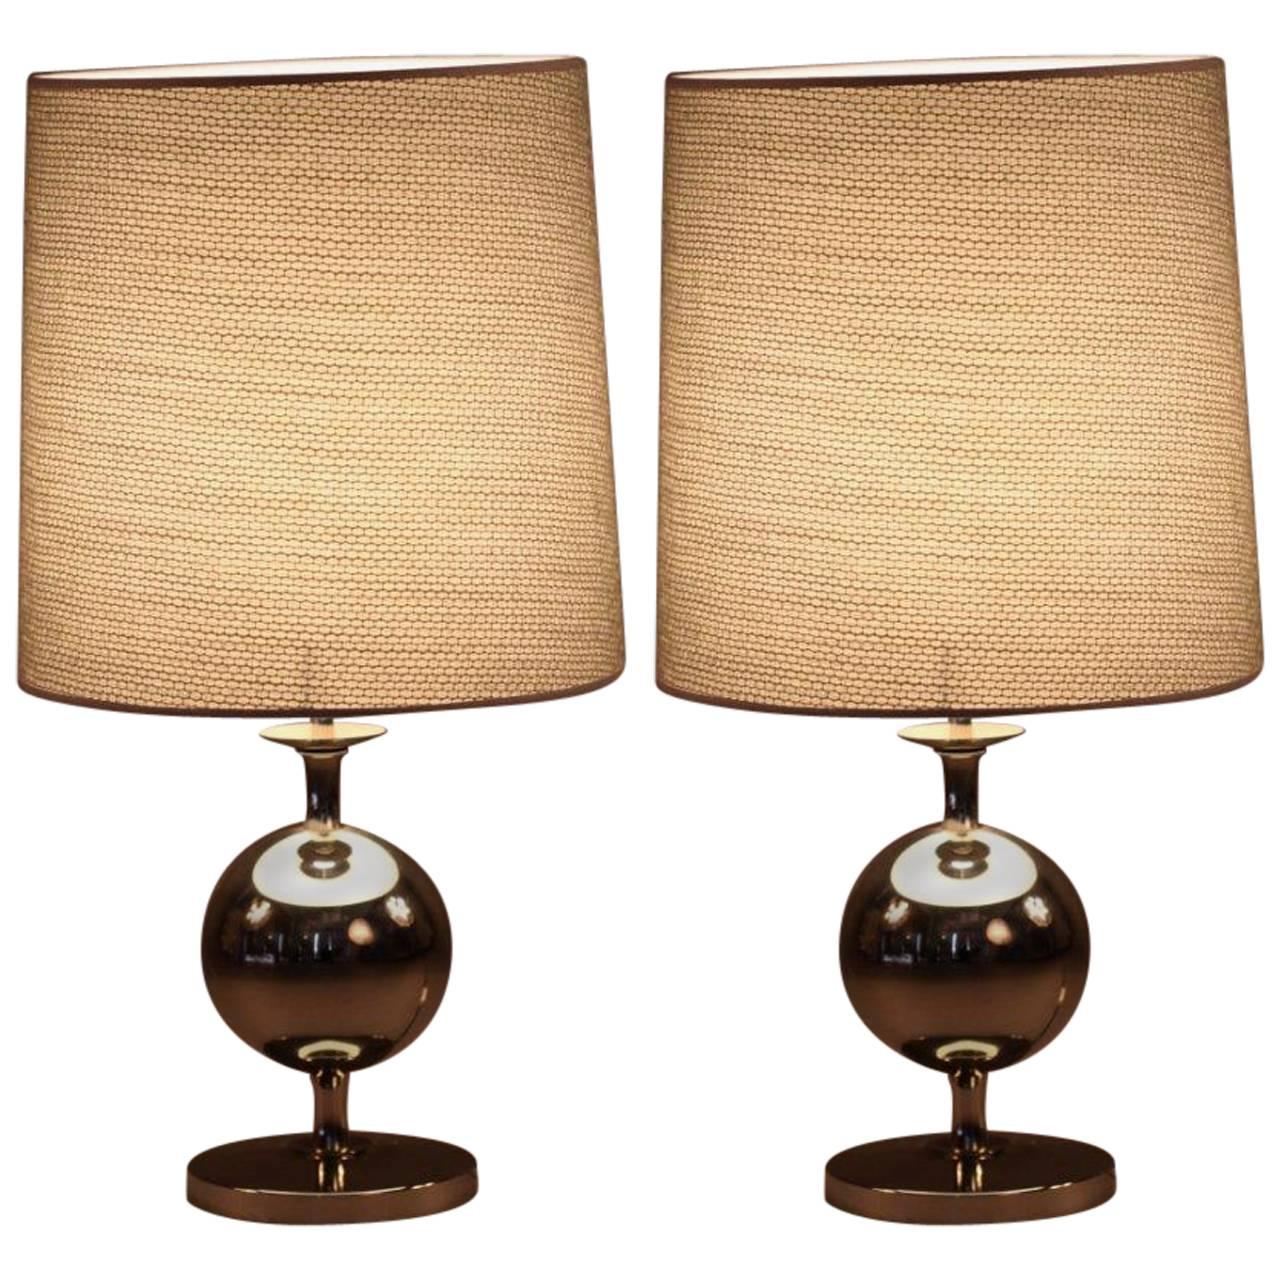 Charming Pair of Space Age Table Lamps Staff Leuchten, Germany, 1970